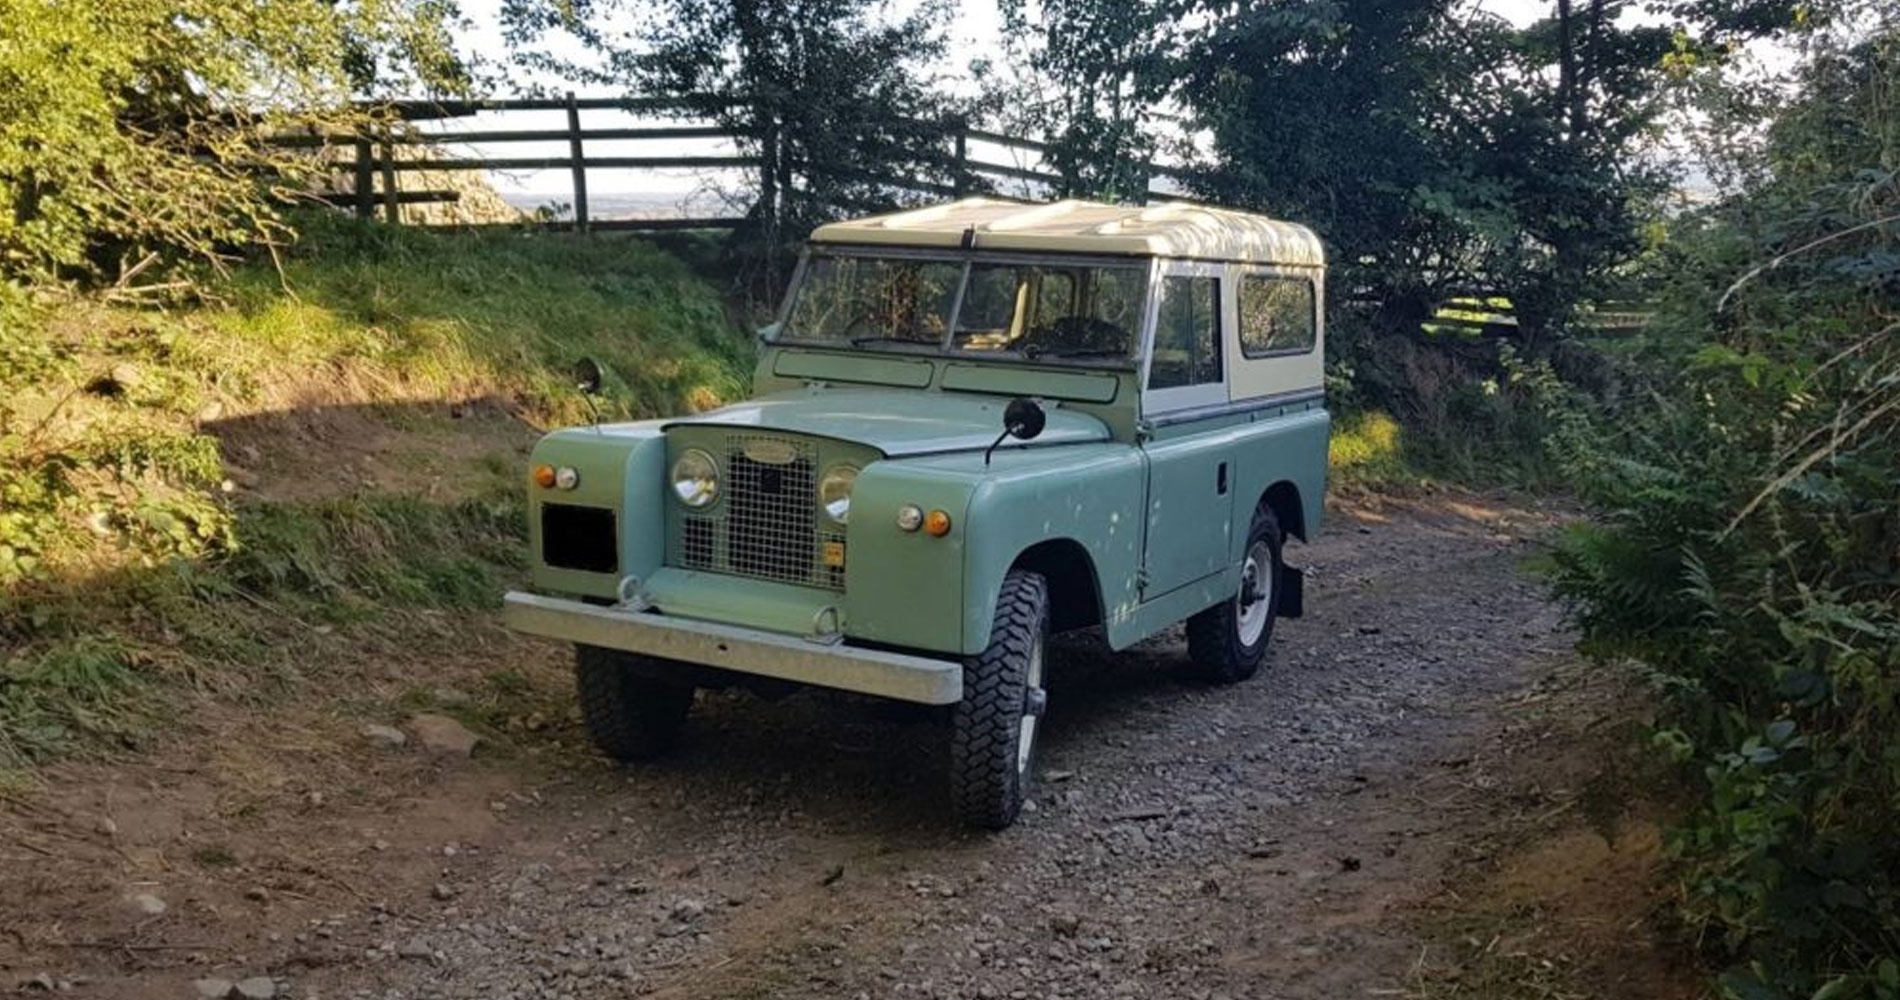 Heritage customer Tony gets his dream car, a Land Rover Series IIA, thanks to TV show Wheeler Dealers